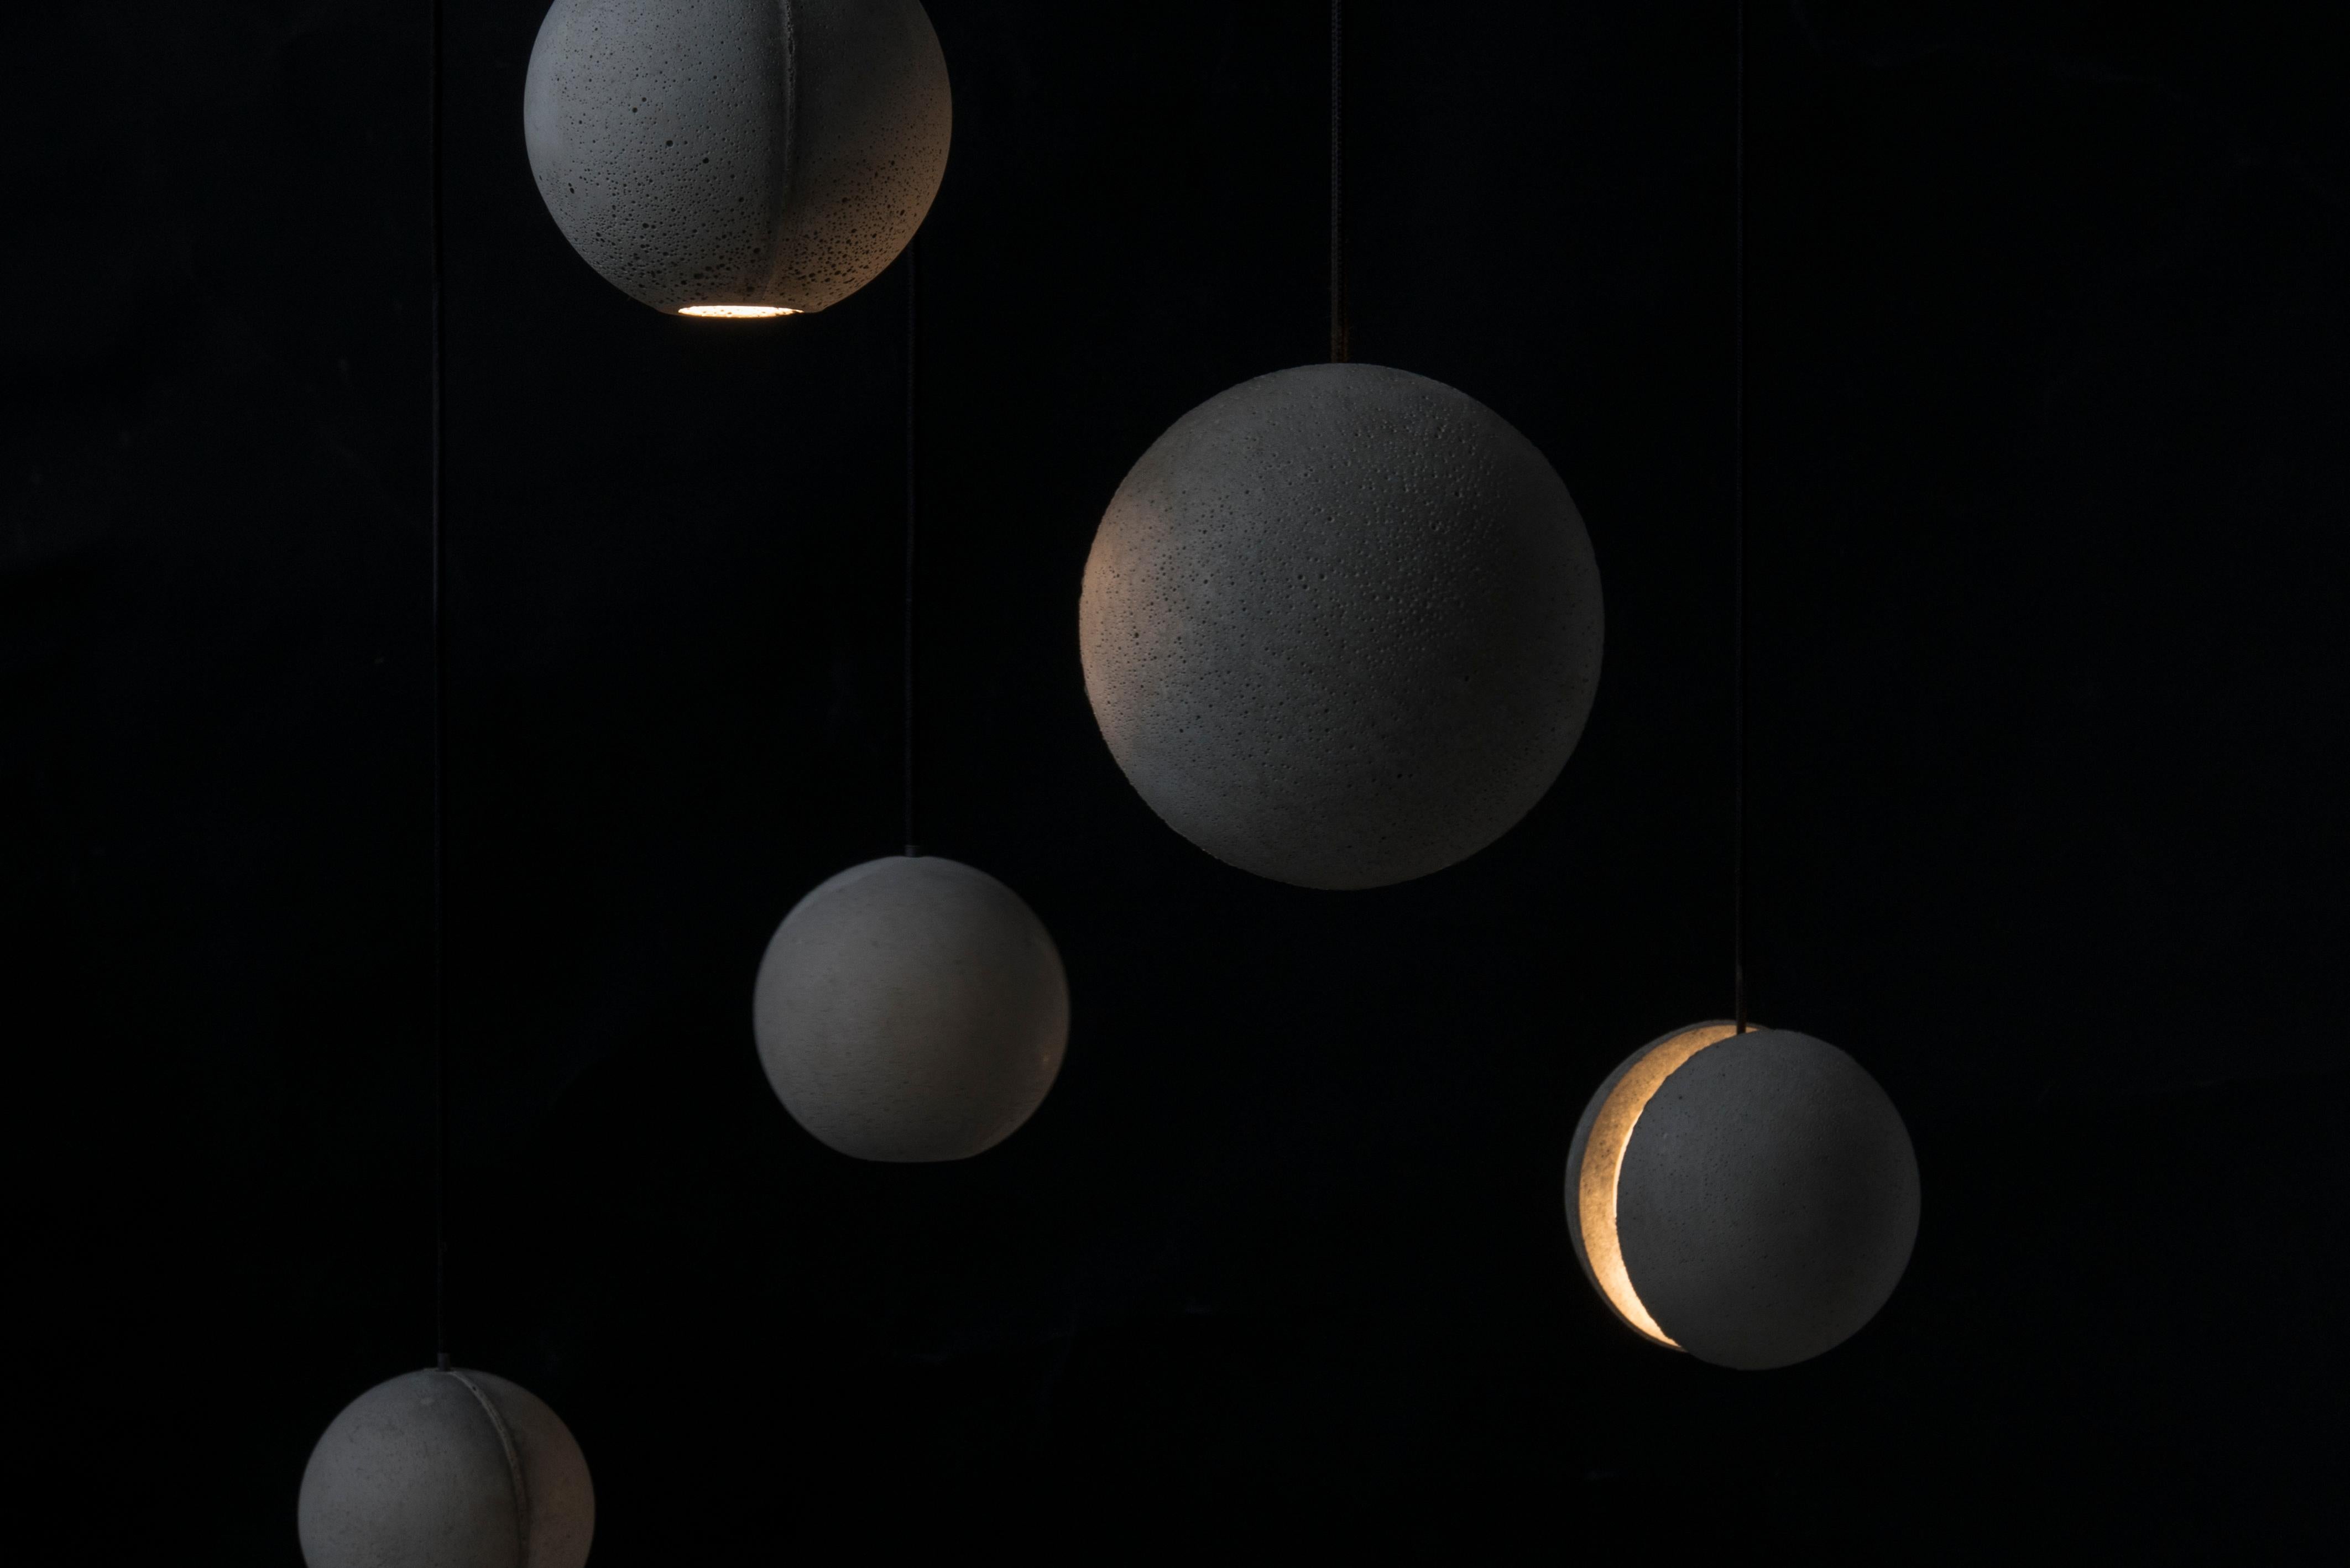 Chinese Concrete and Aluminum Pendant Lamp, “Moon, ” S, from Concrete Collection by Bentu